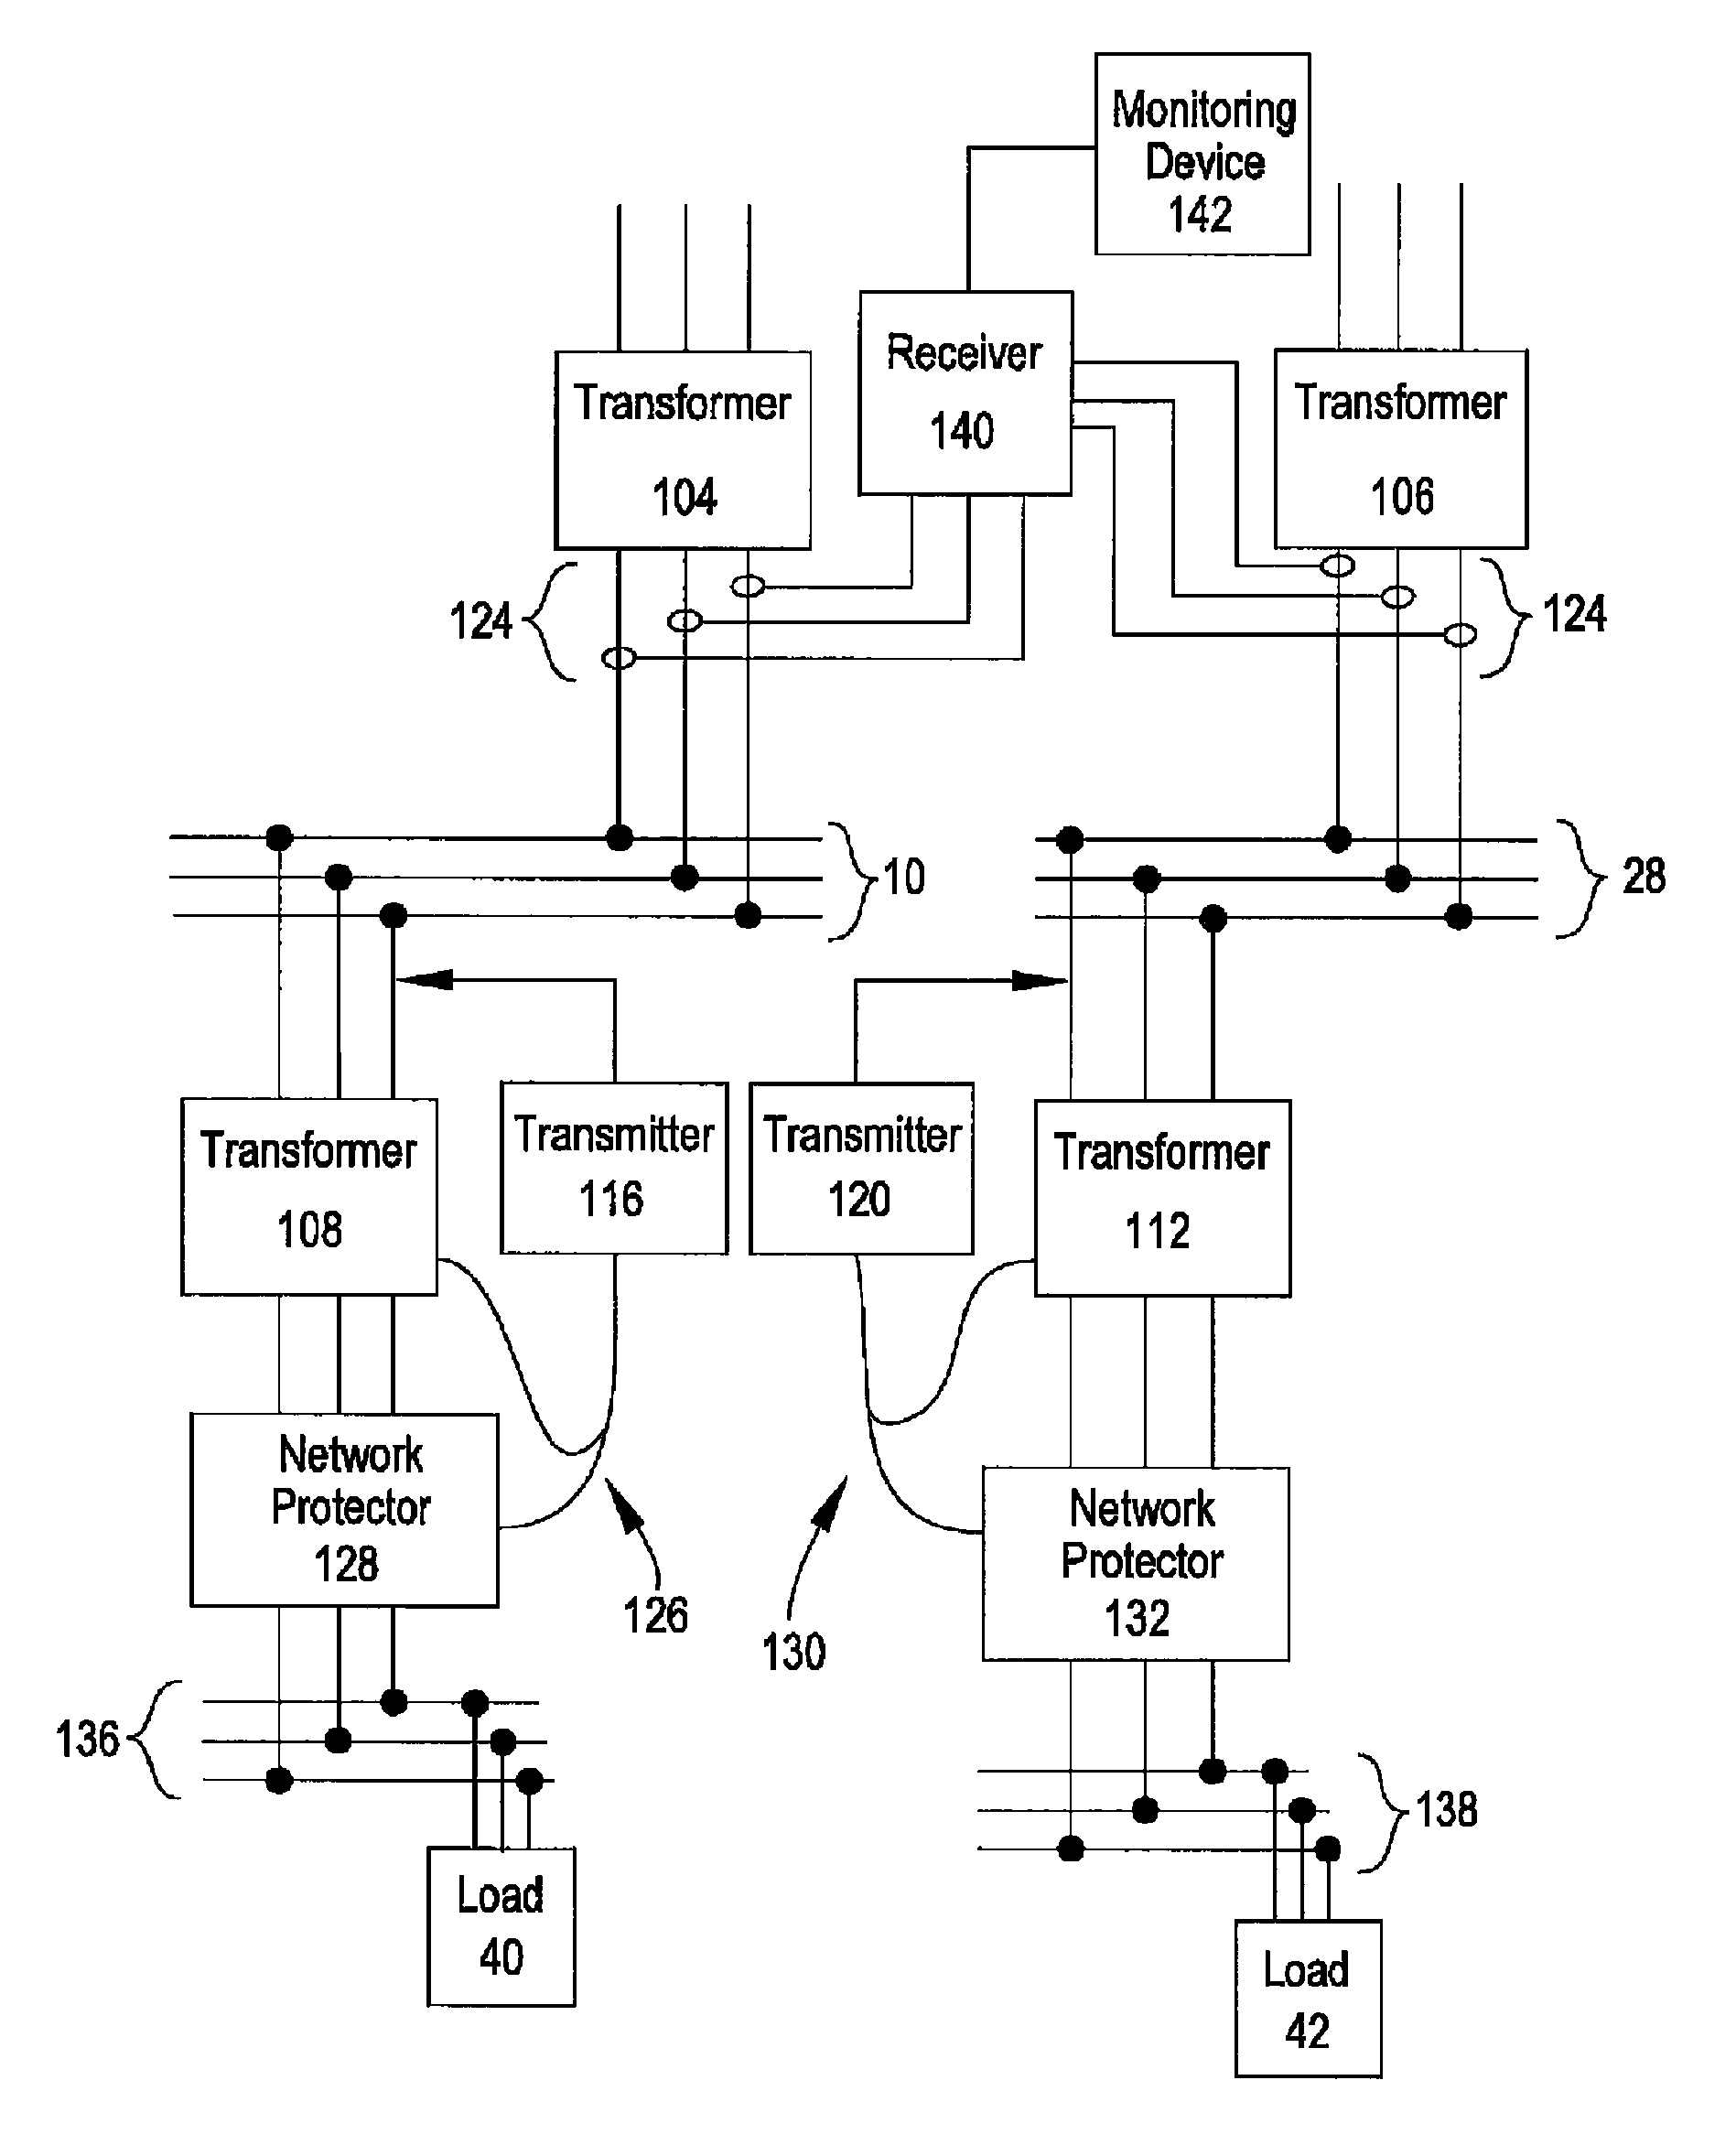 Remote monitoring of control decisions for network protectors